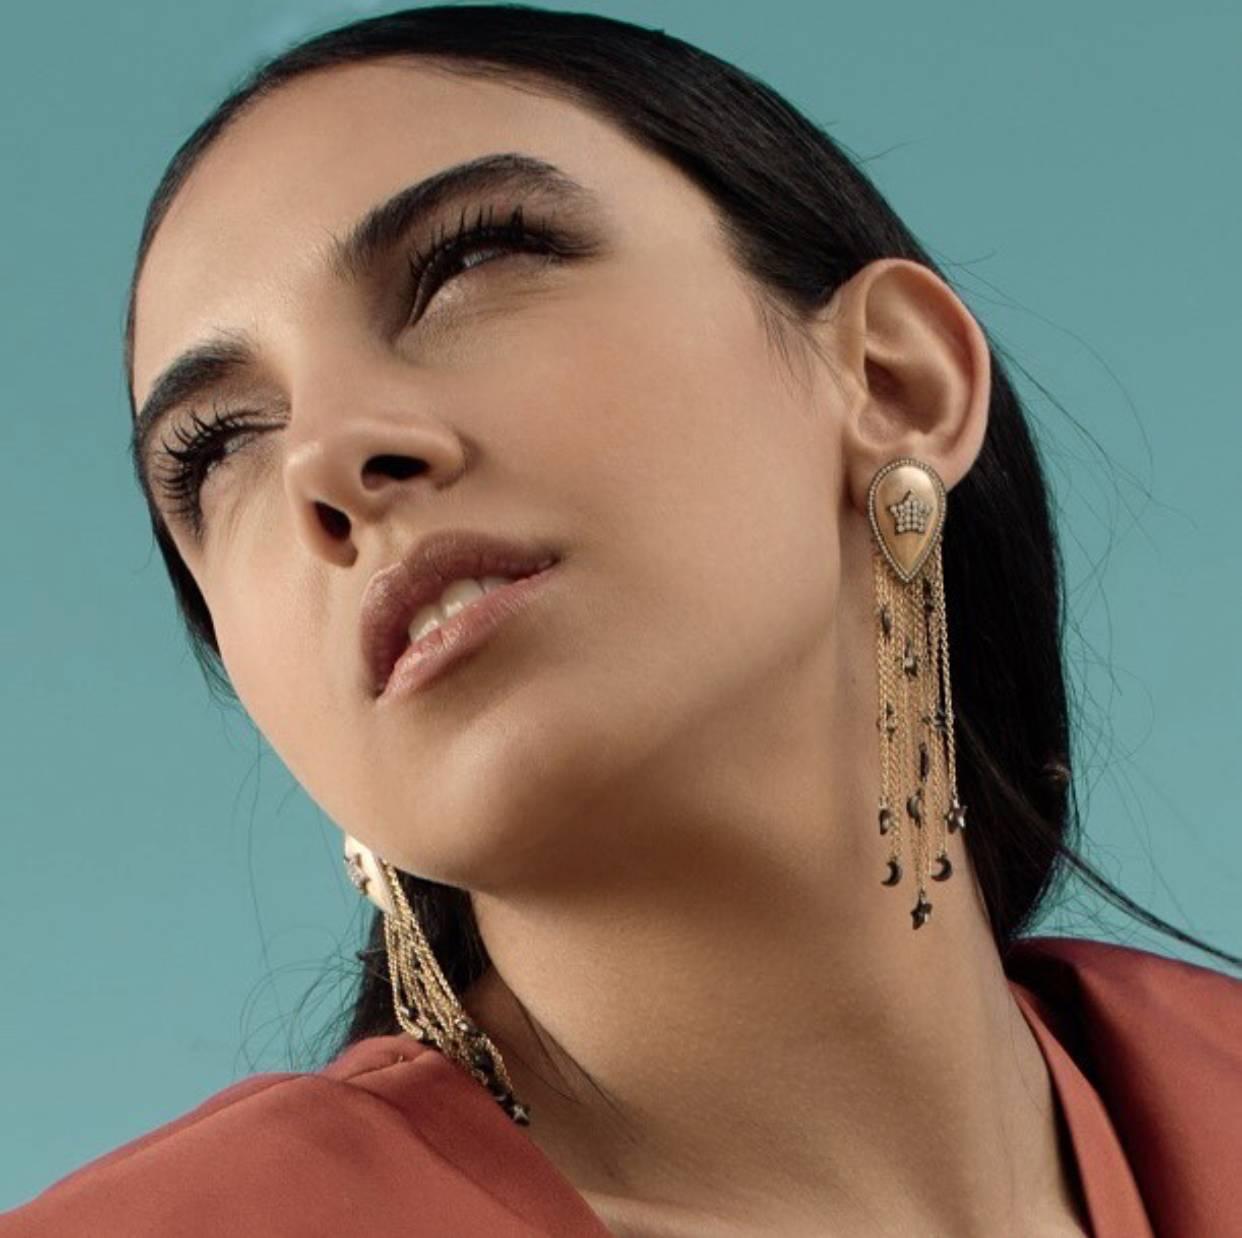 Part of AMMANII's Sa'mma = Sky Collection. Homage to the sky, the universal blanket that covers mankind and connects us all under its wings. The drop earrings with moon and stars tassels stand for all the women; the radiant stars, givers of light